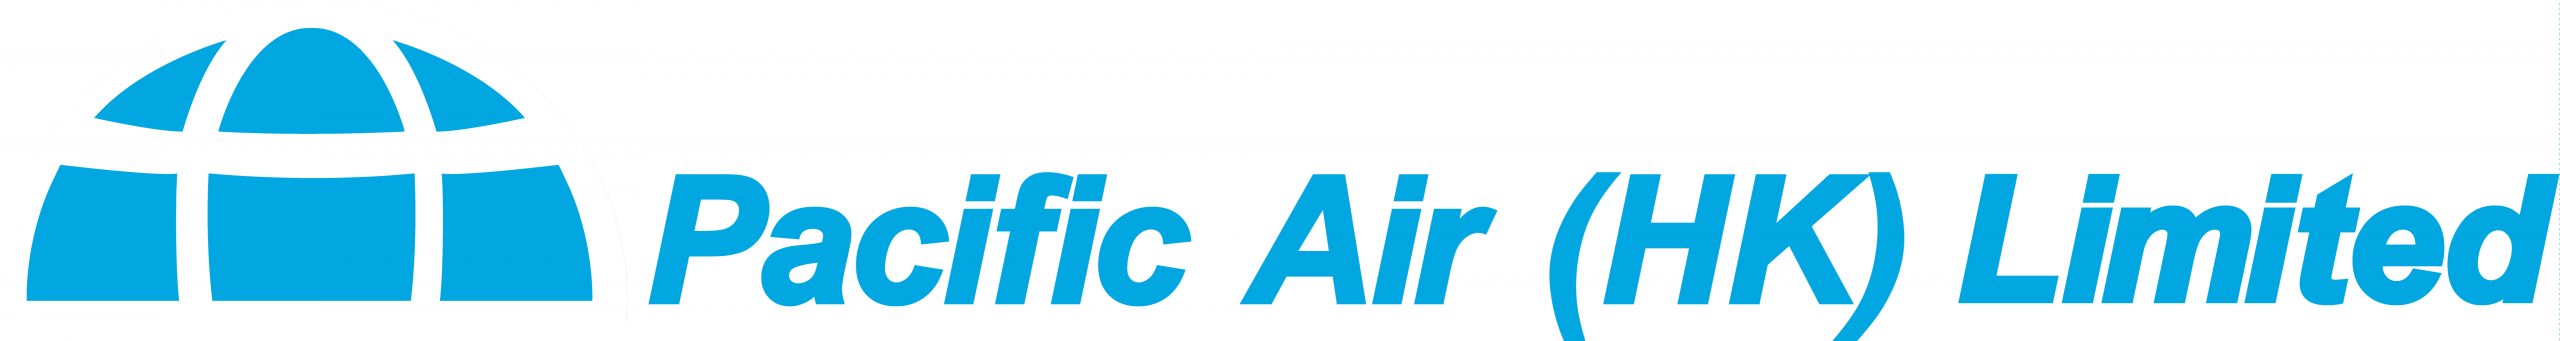 Pacific Air (HK) Limited